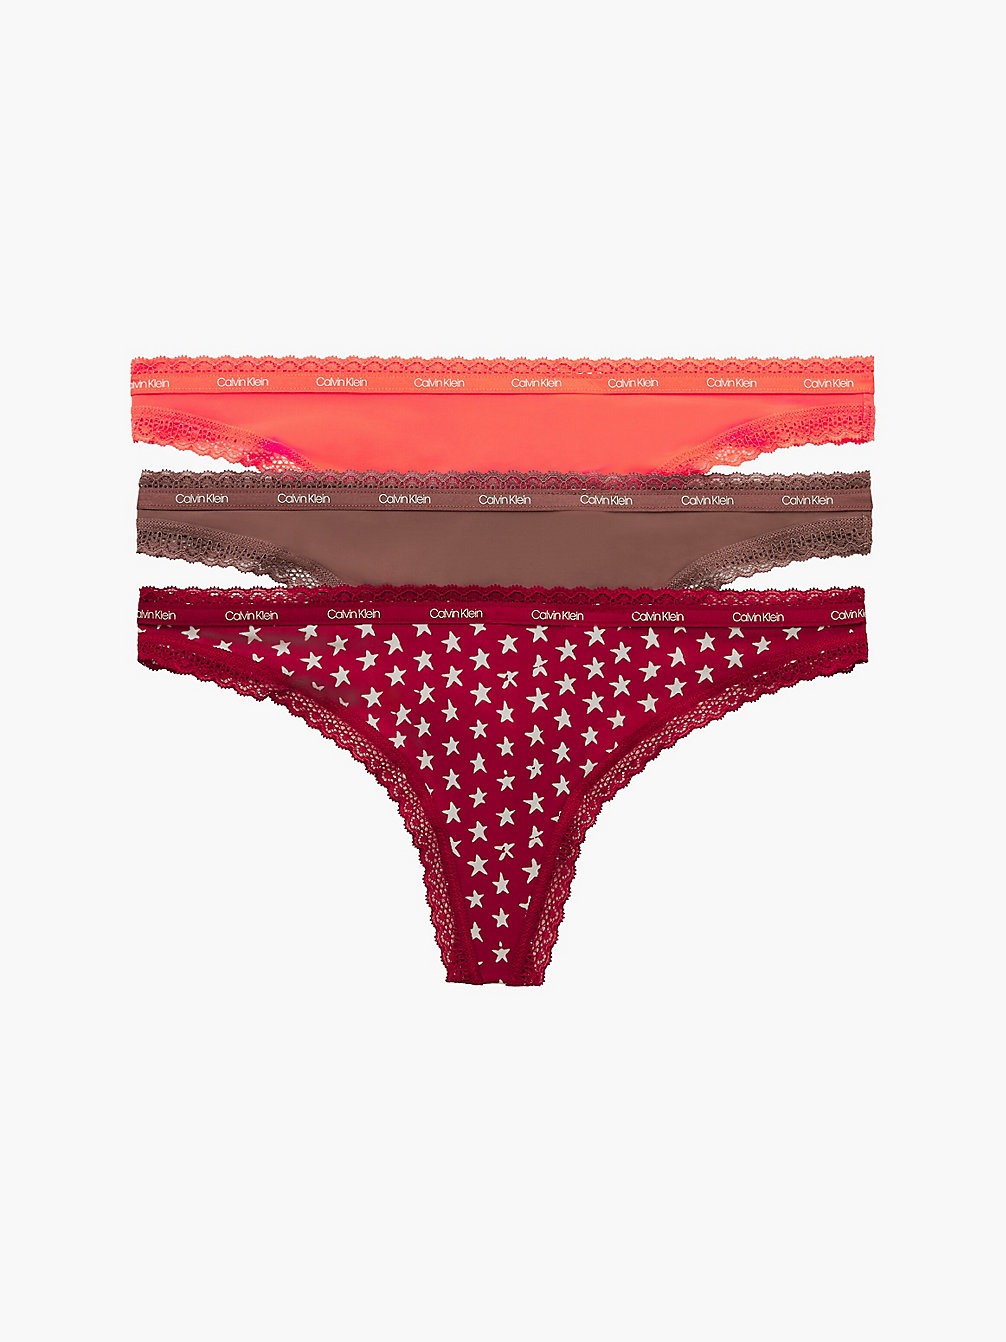 STAR STAMP_RED/BURNT EMBERS/CAMEL > 3-Pack Strings - Bottoms Up > undefined dames - Calvin Klein